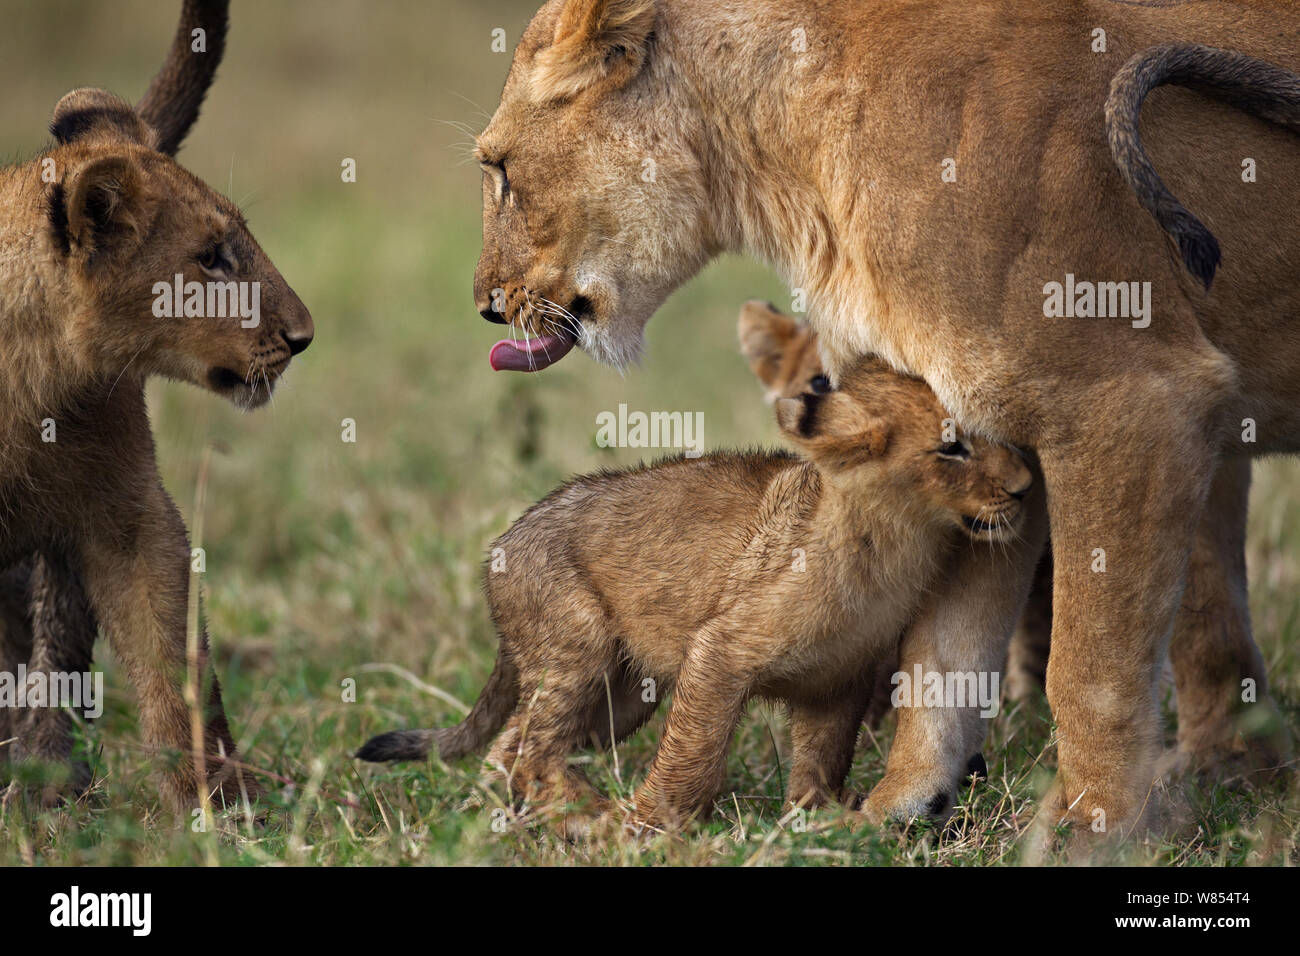 African lion (Panthera leo) cub aged 4 months seeking comfort from its mother after being bullied by an older cub aged 10 months, Masai Mara National Reserve, Kenya, August Stock Photo